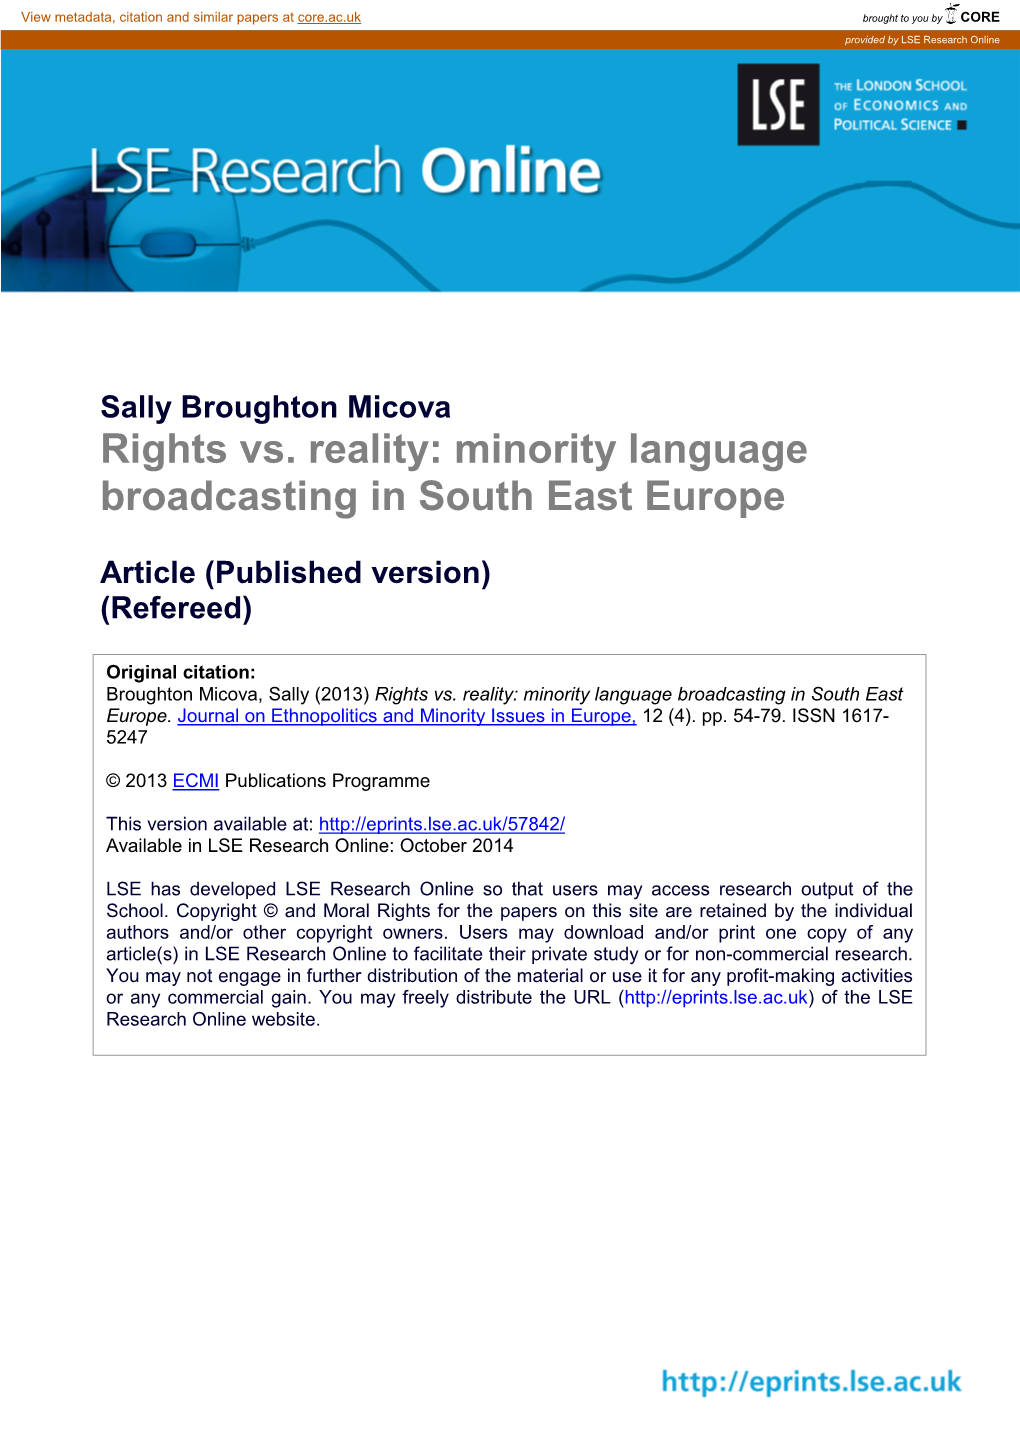 Minority Language Broadcasting in South East Europe